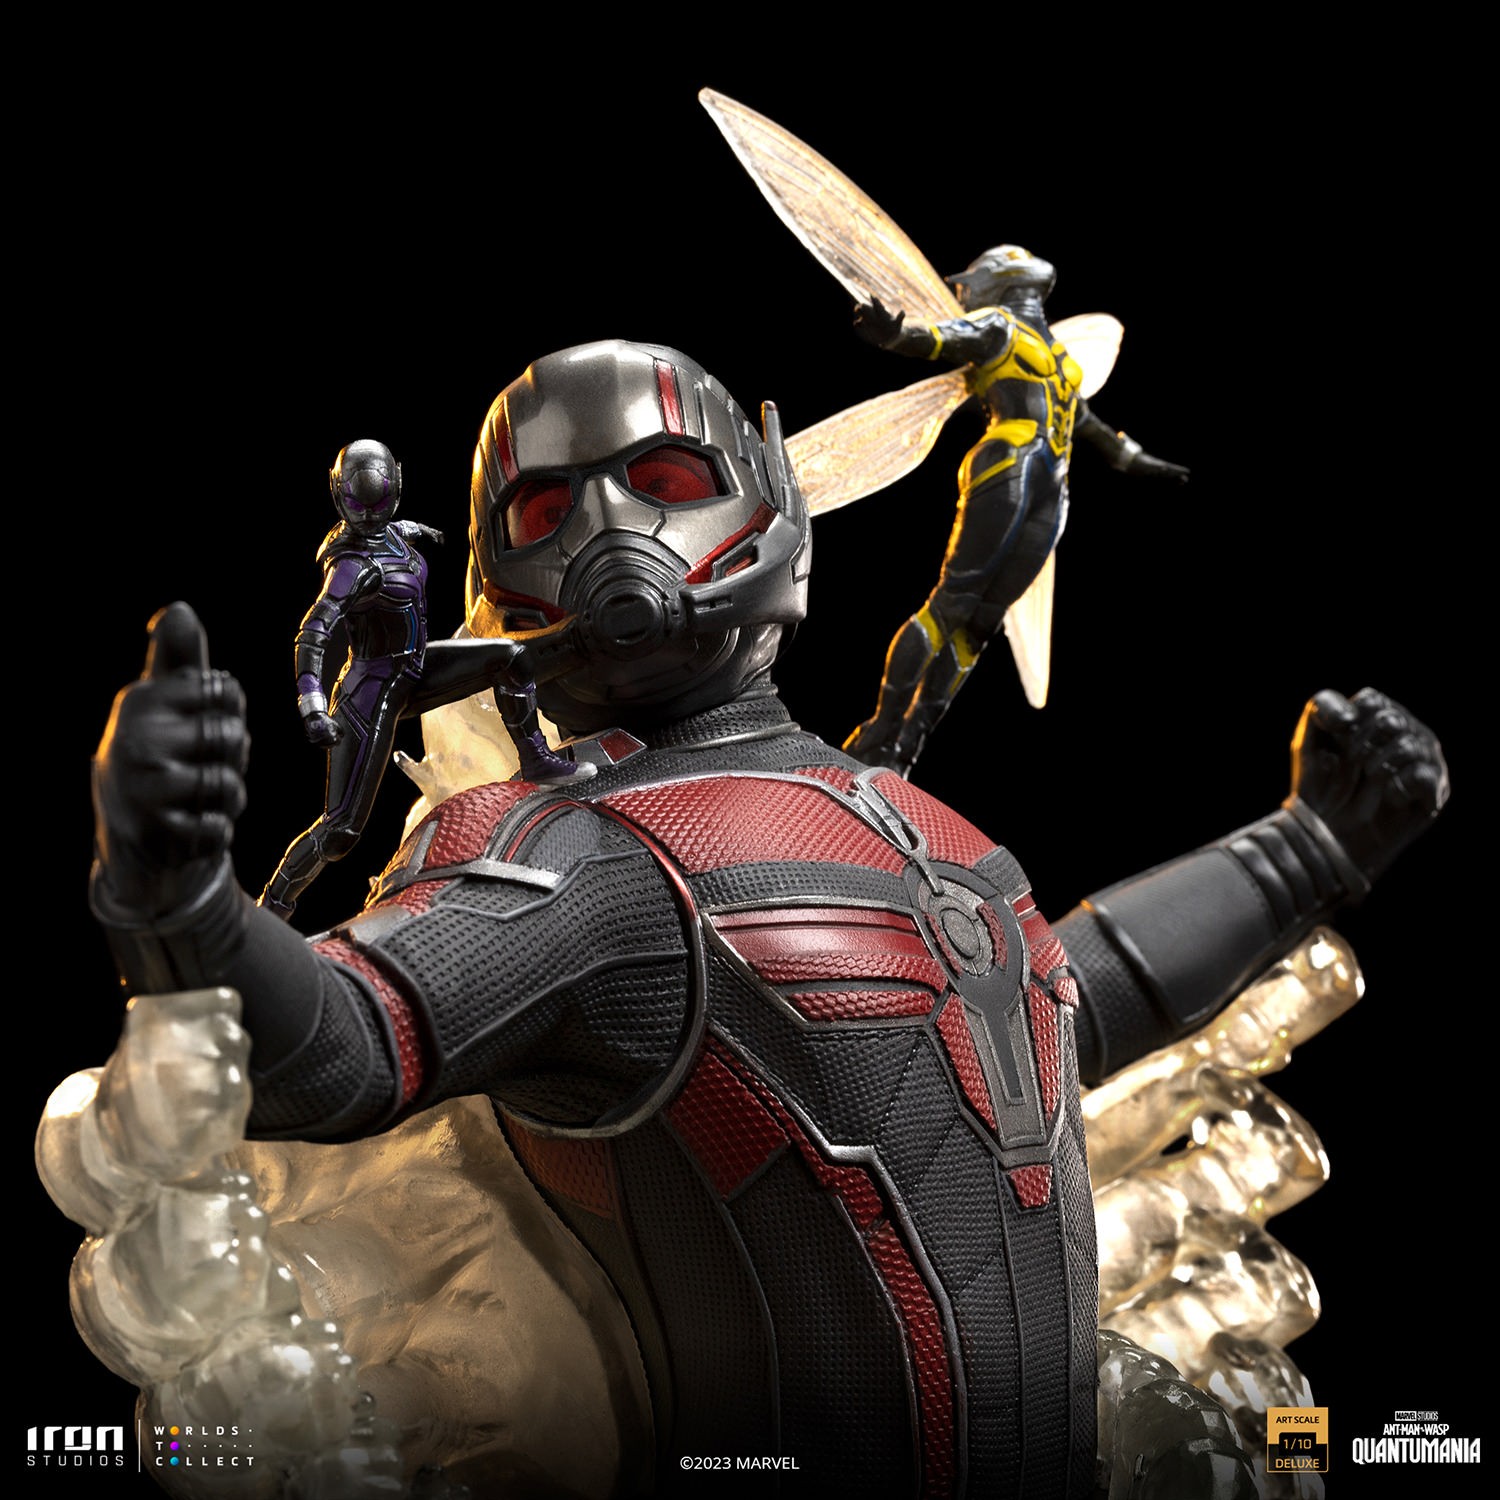 Quantumania Ant-Man and the Wasp Deluxe- Prototype Shown